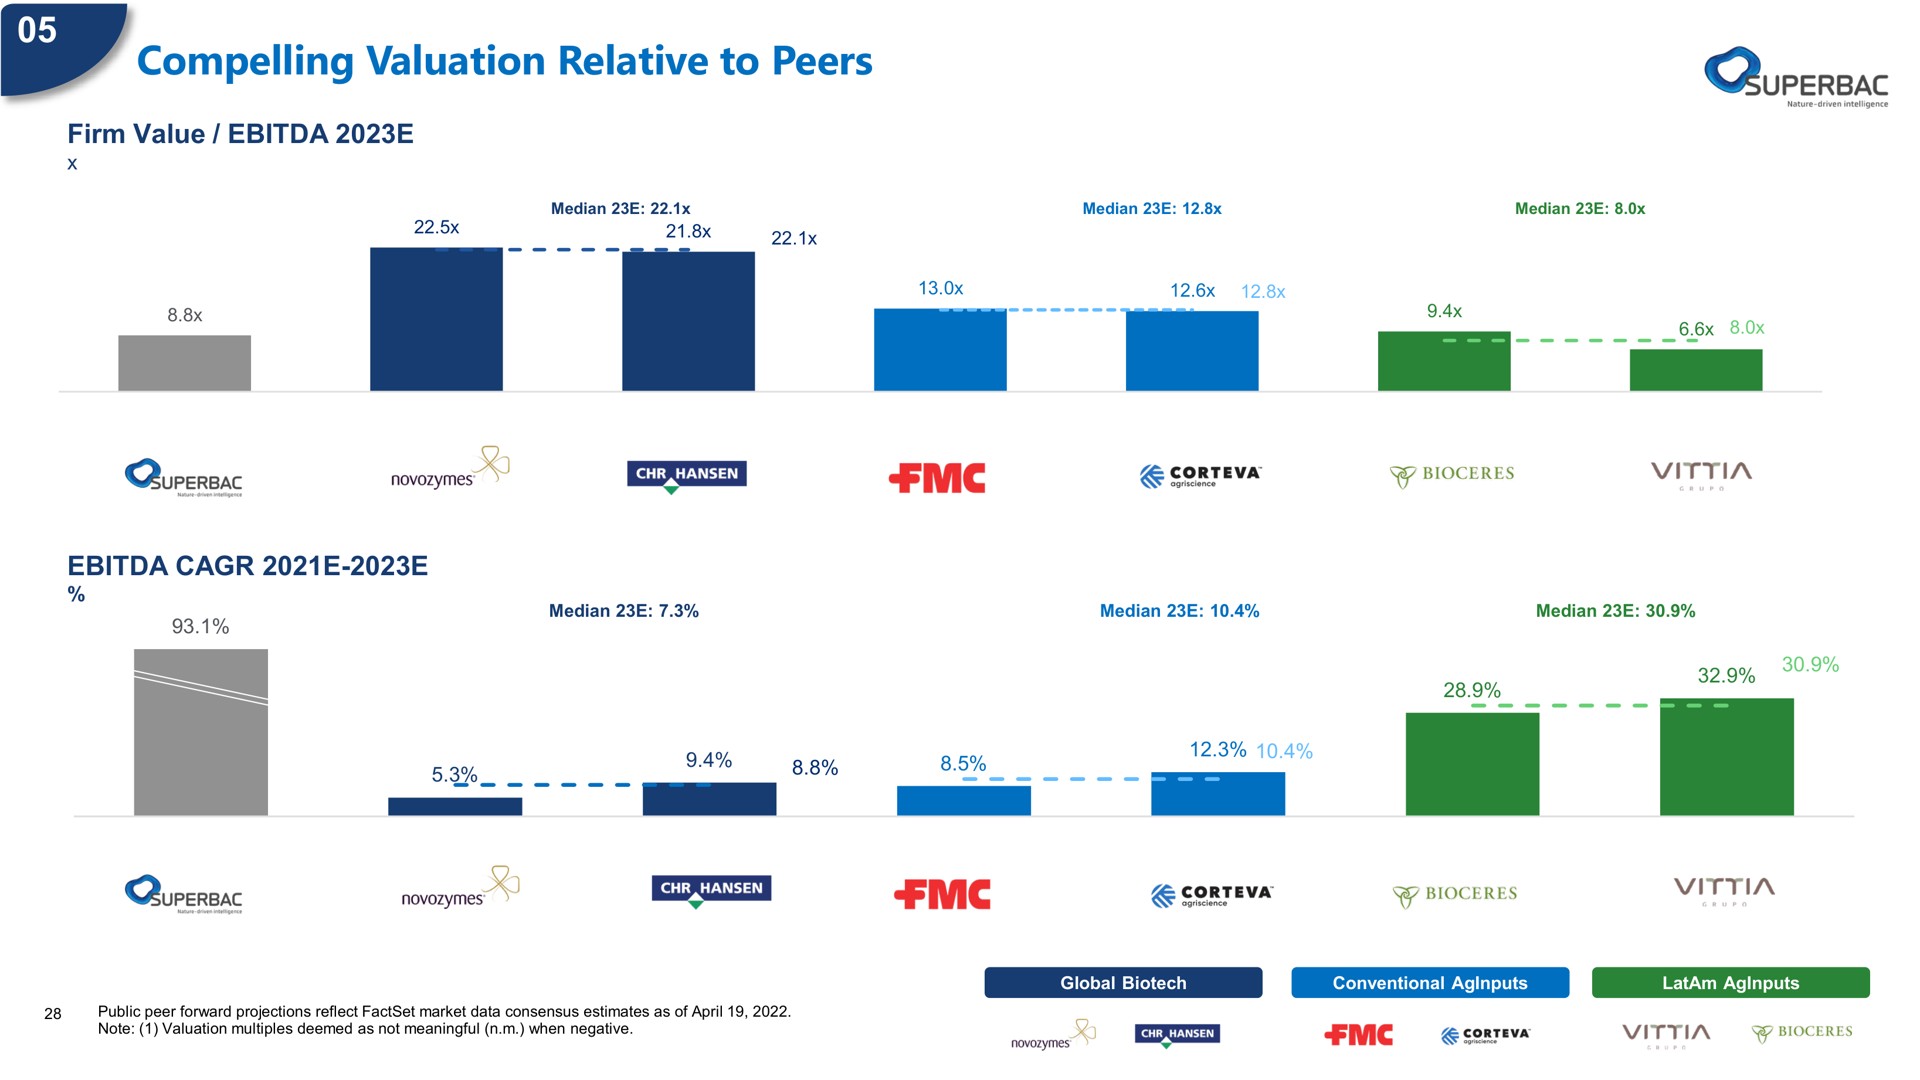 compelling valuation relative to peers see | Superbac